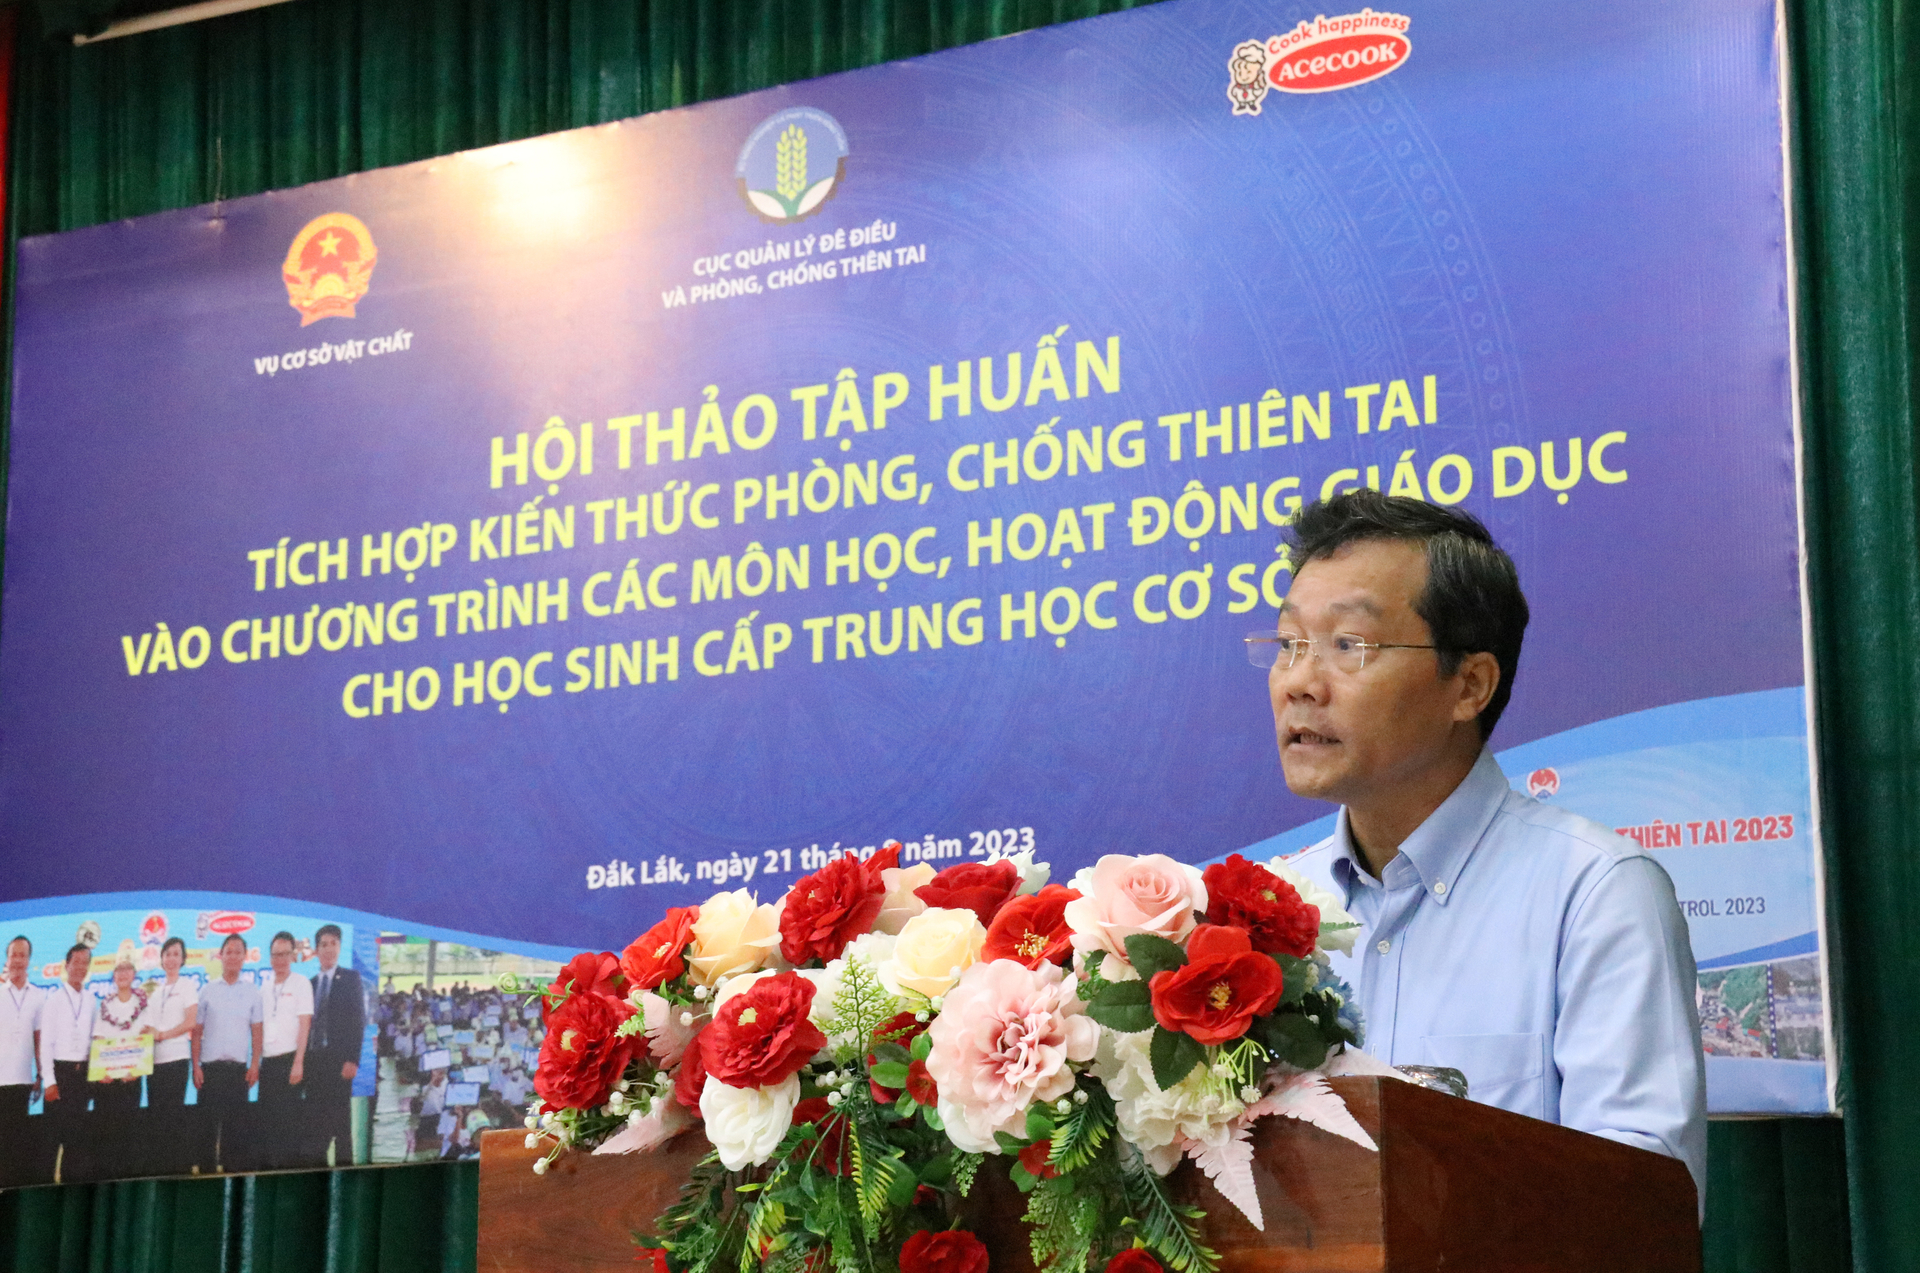 Mr. Nguyen Van Tien, Deputy Director of the Vietnam of Disaster andDike Management Authority, said that after each natural disaster, children are among the most vulnerable. Photo: Quang Yen.